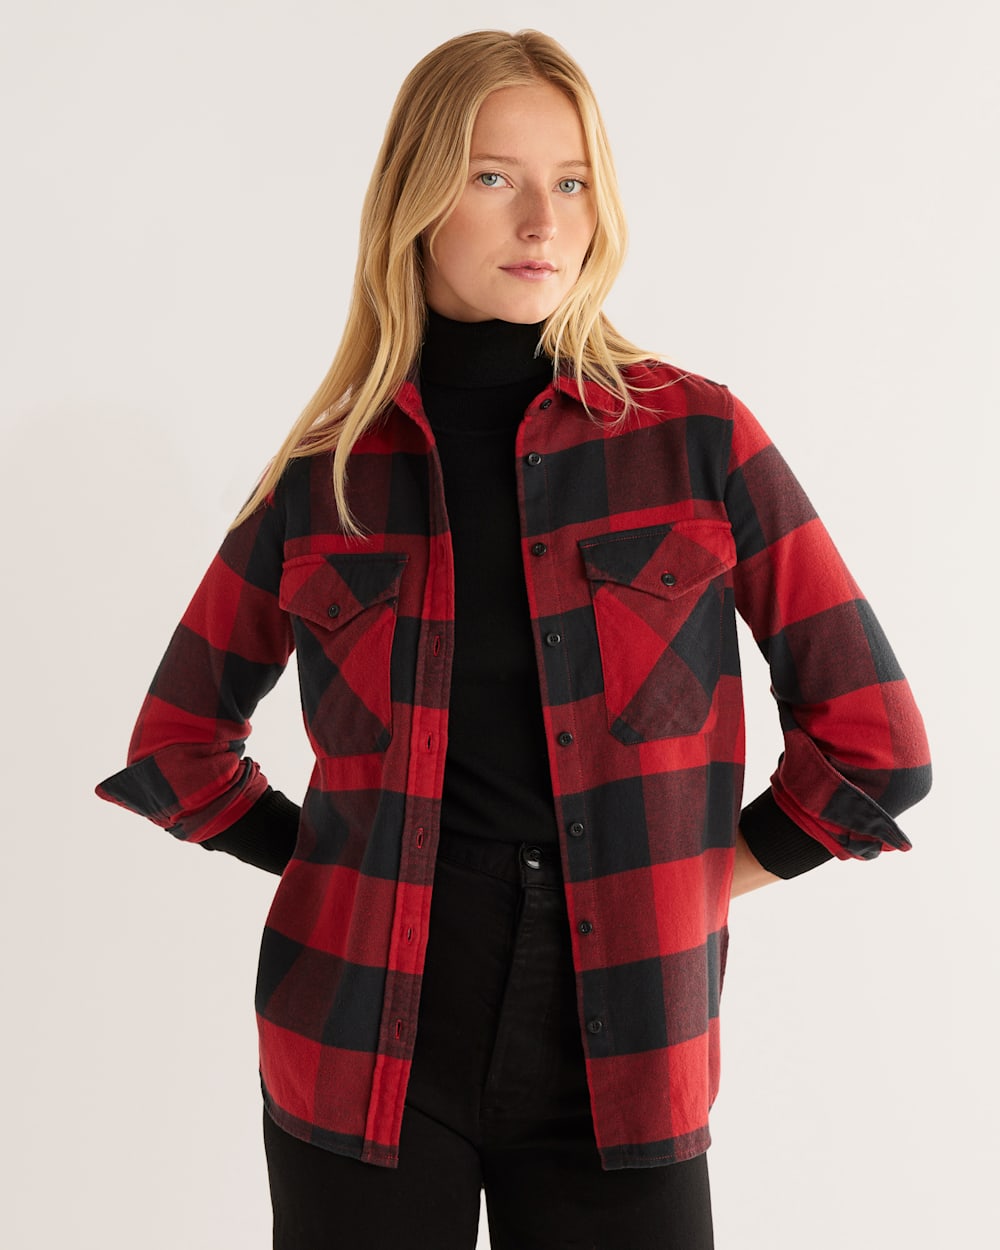 ALTERNATE VIEW OF WOMEN'S MADISON DOUBLE-BRUSHED FLANNEL SHIRT IN RED/BLACK BUFFALO CHECK image number 4